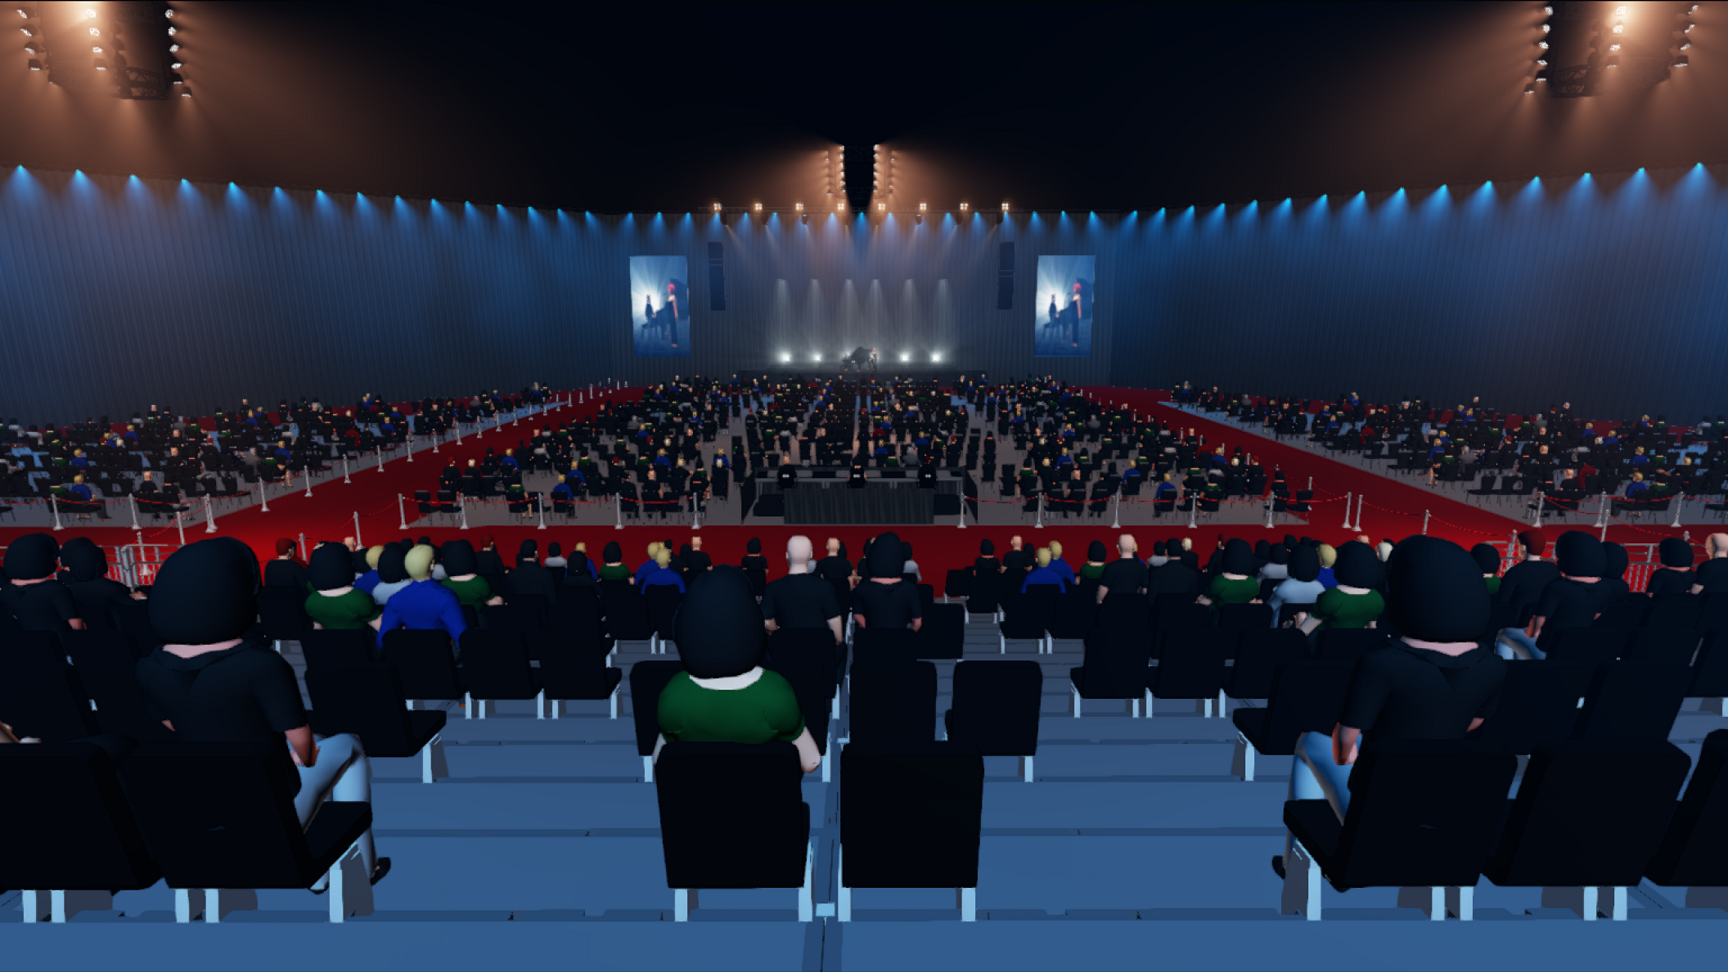 20200702_-_M-theater_-_V6R4.png